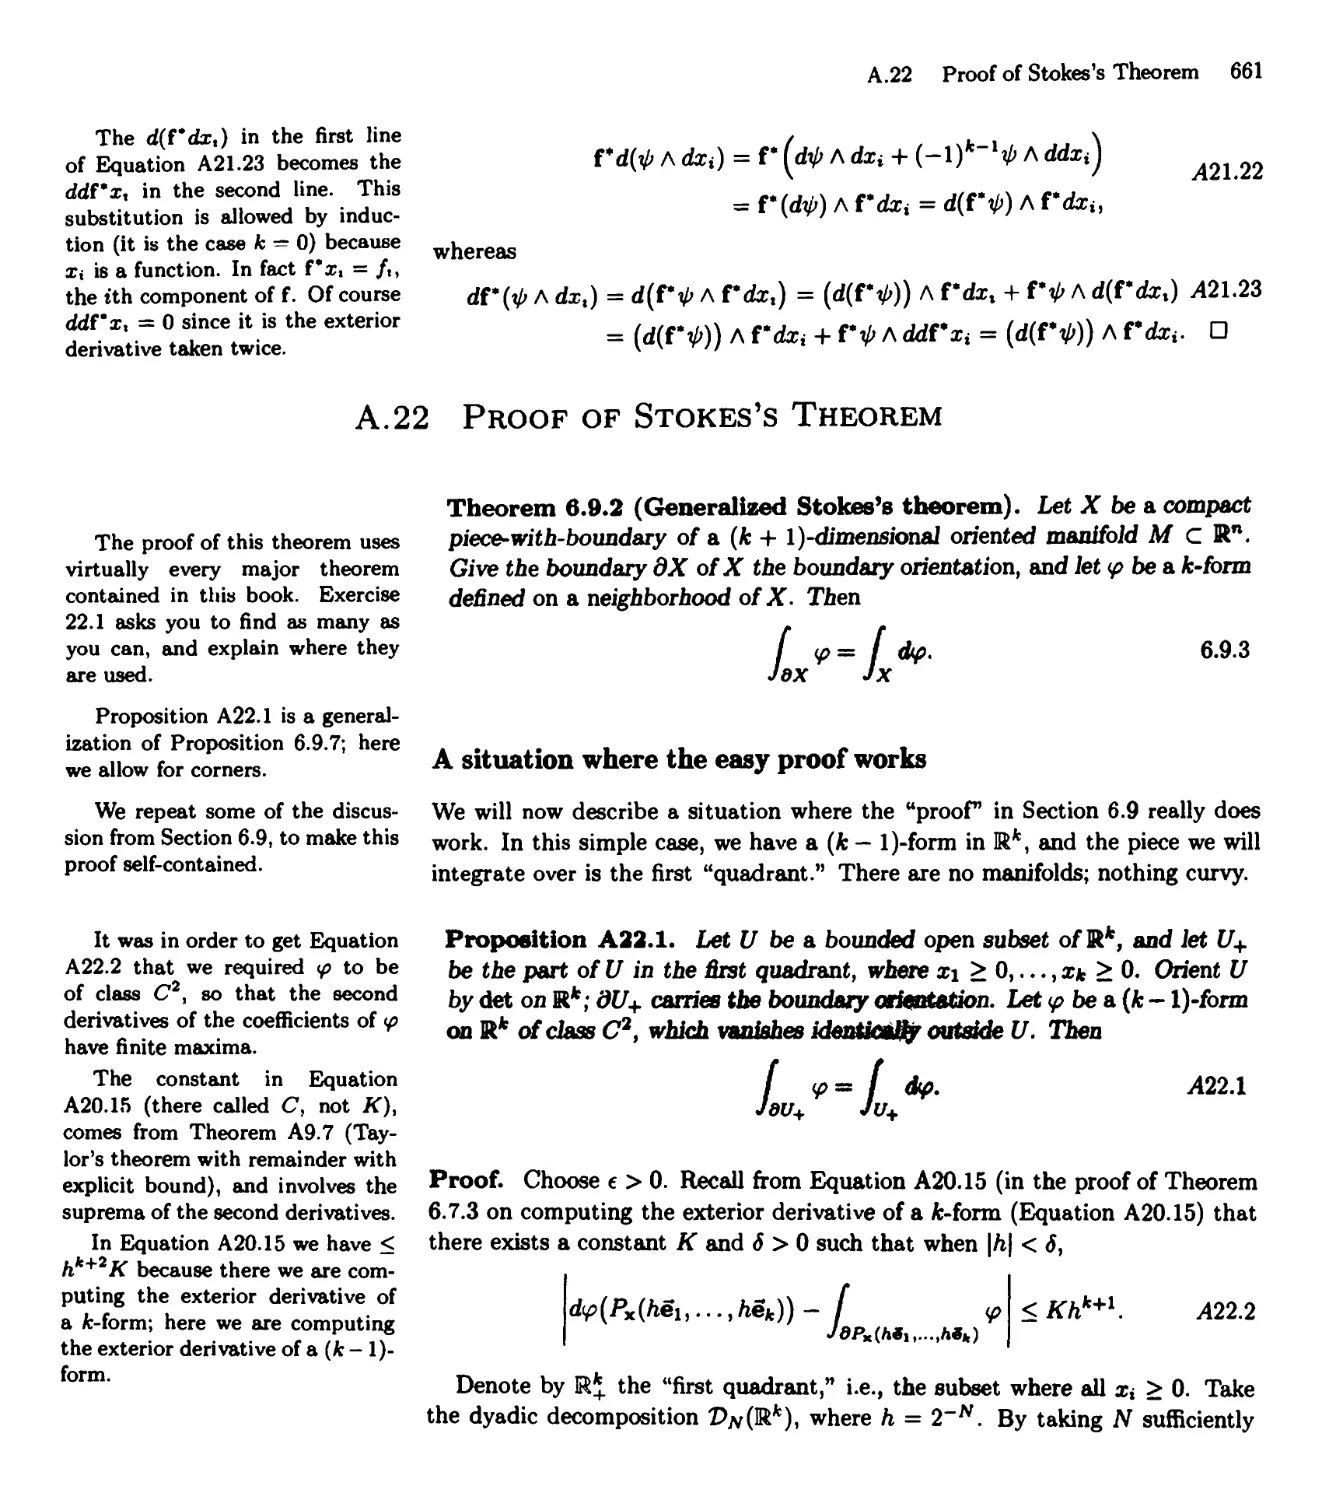 A.22 Proof of Stokes' Theorem